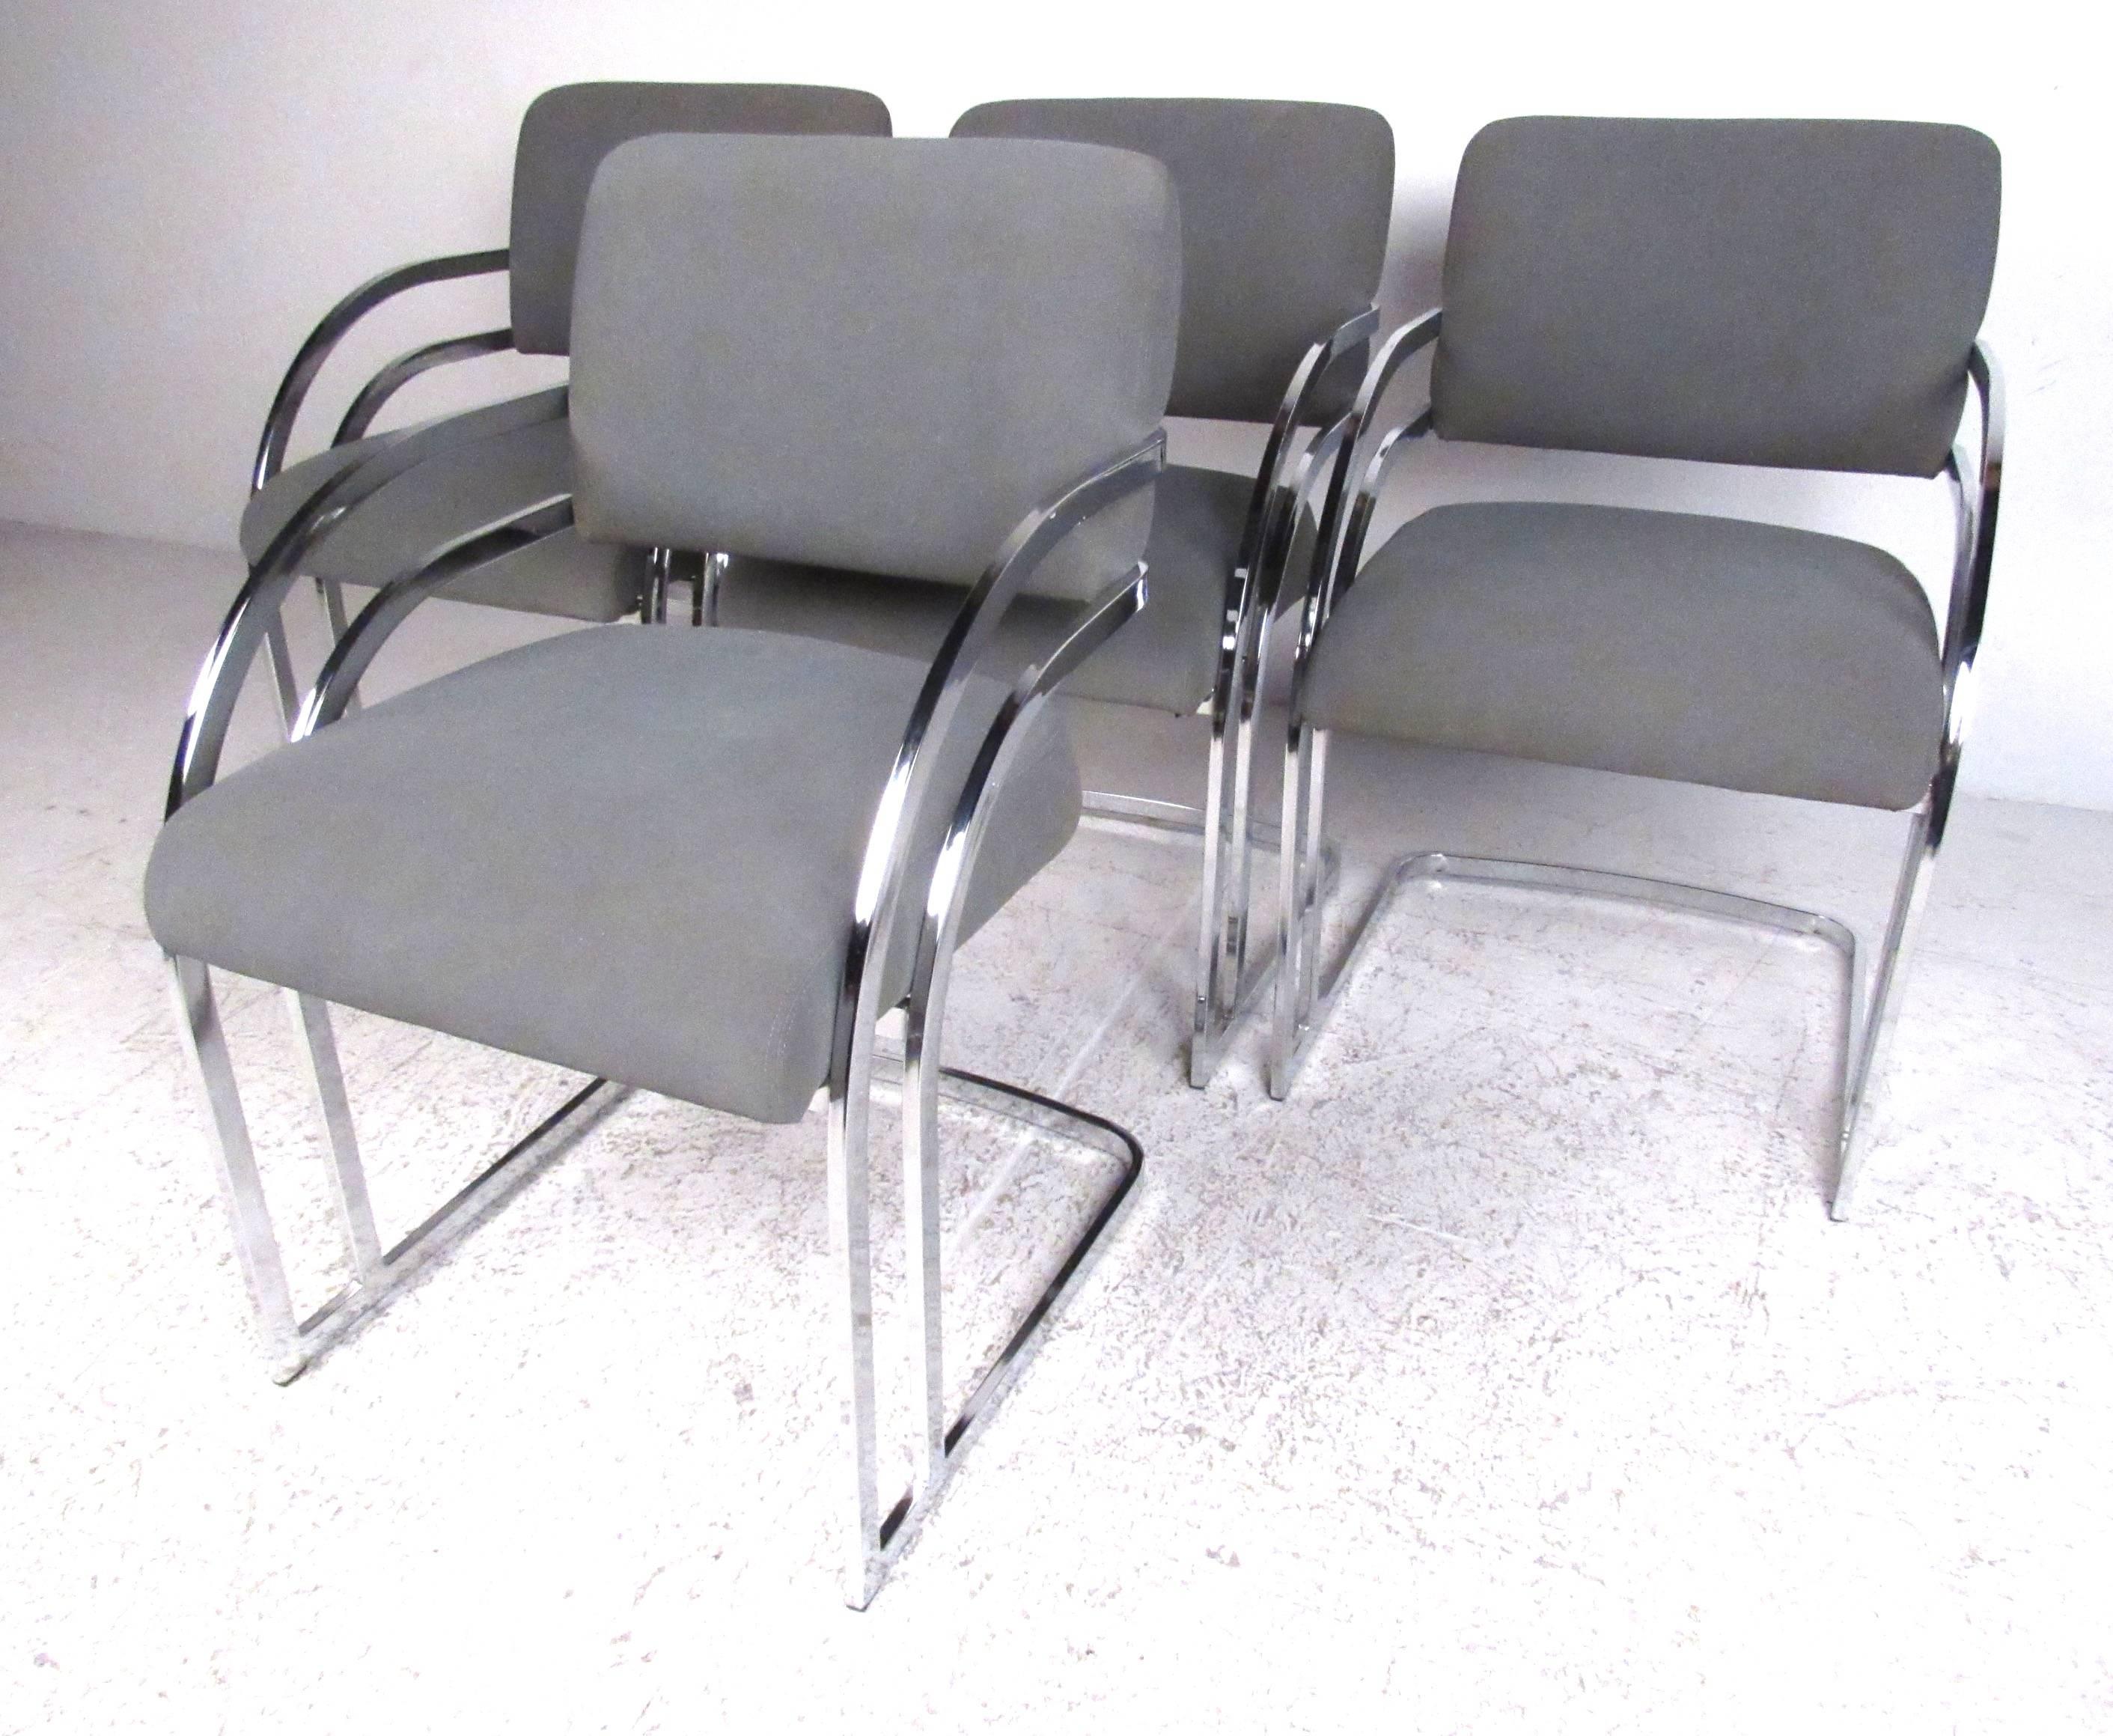 Set of four dining armchairs by Contemporary Shells Inc., Hempstead NY featuring chrome frames with a deep grey wool felt upholstery. Very stylish Mid-Century Modern in appearance, these chairs can easily fit into a residential or office